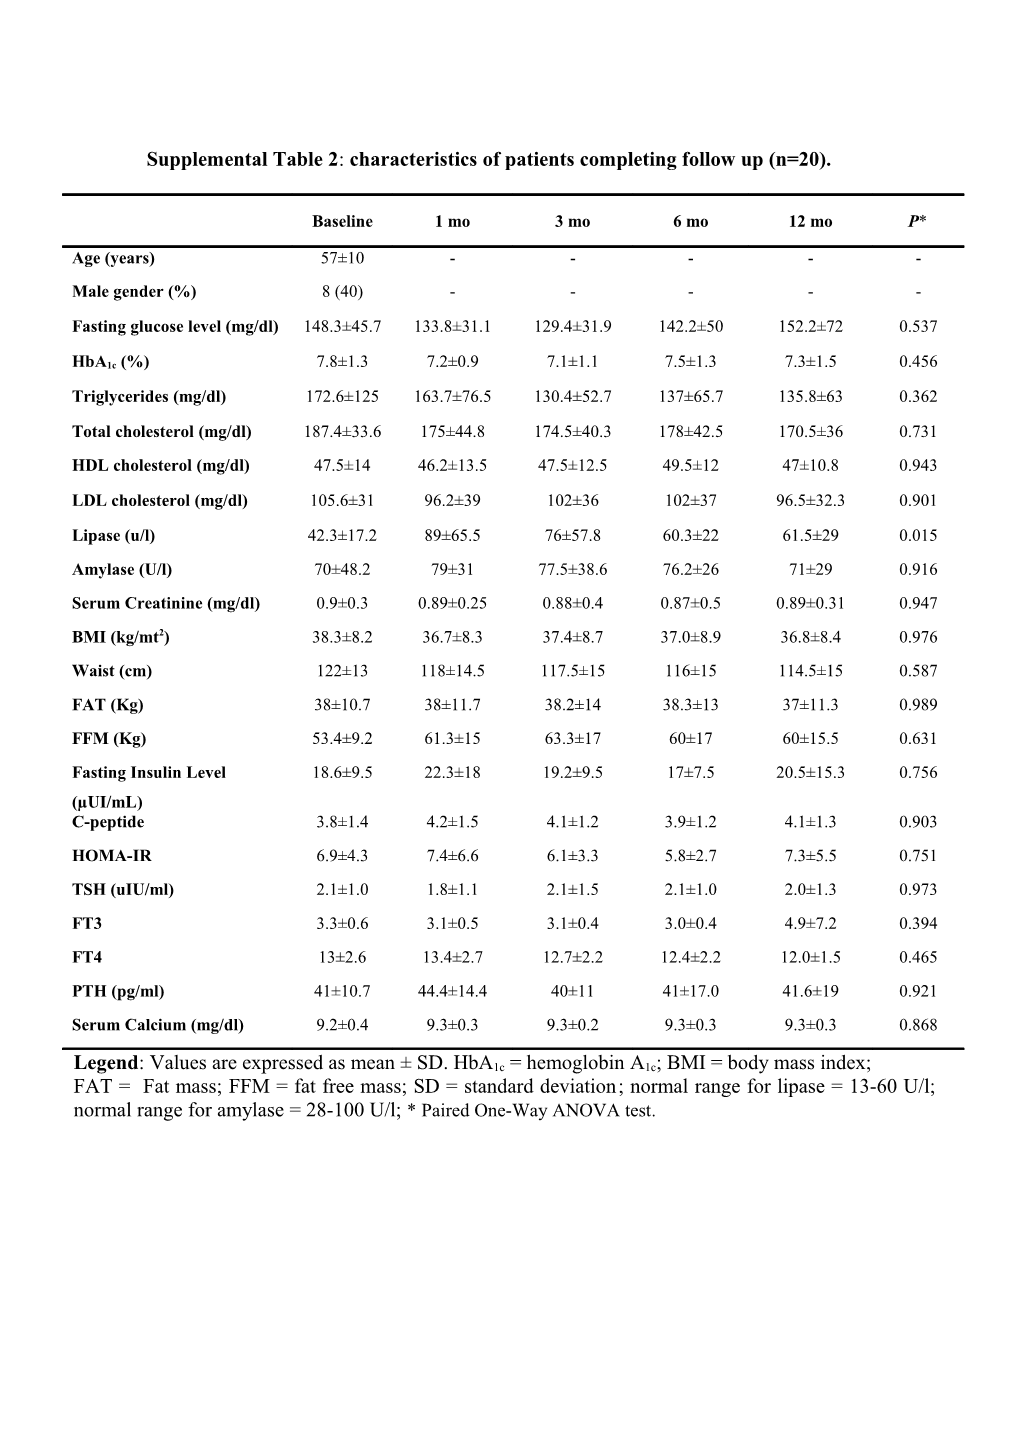 Supplemental Table 2: Characteristics of Patients Completing Follow up (N=20)